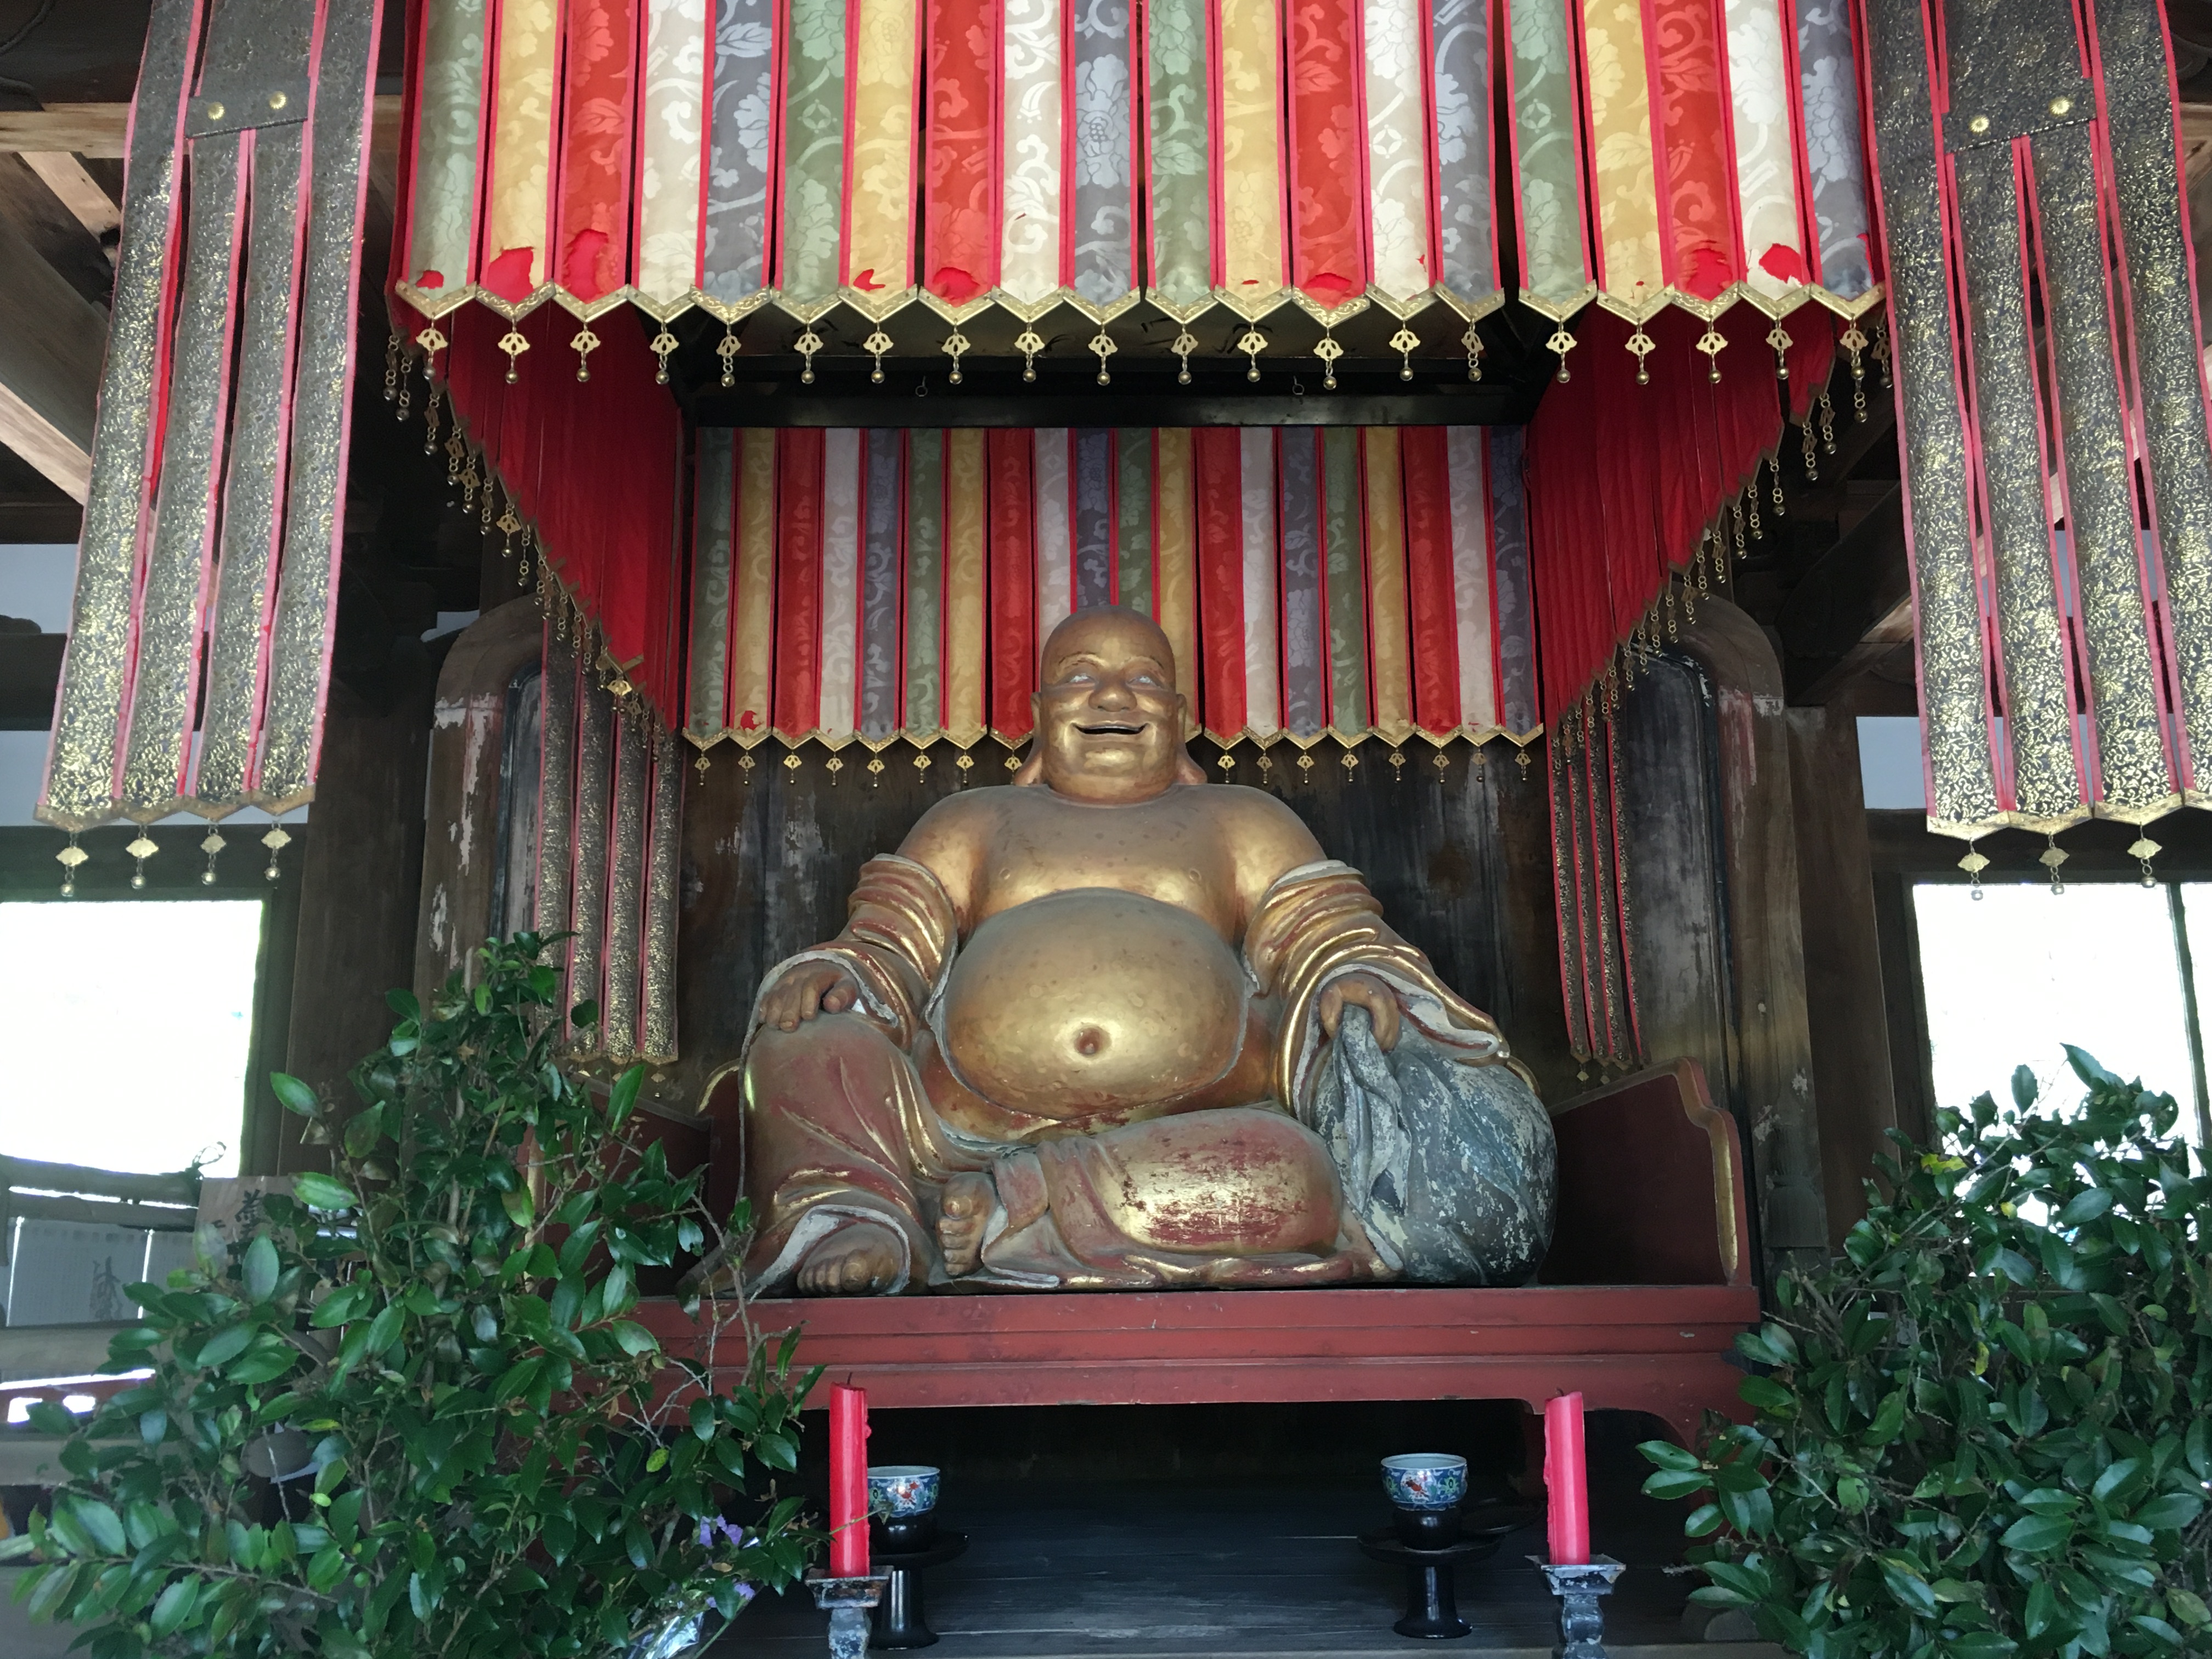 large golden statue of hotei in manpuku-ji temple under a rainbow of hanging fabric